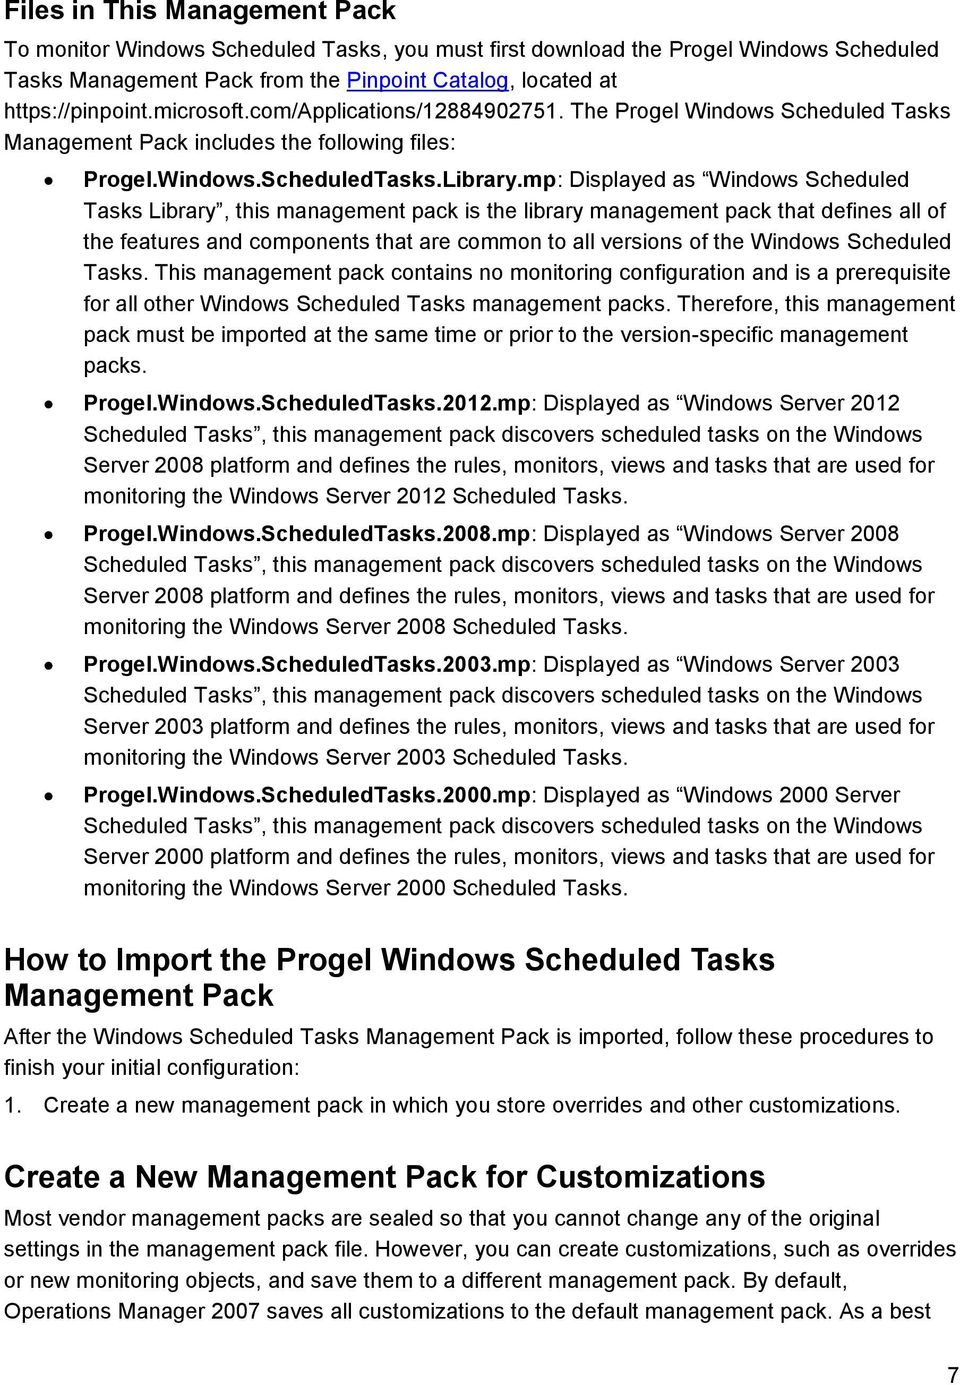 mp: Displayed as Windows Scheduled Tasks Library, this management pack is the library management pack that defines all of the features and components that are common to all versions of the Windows